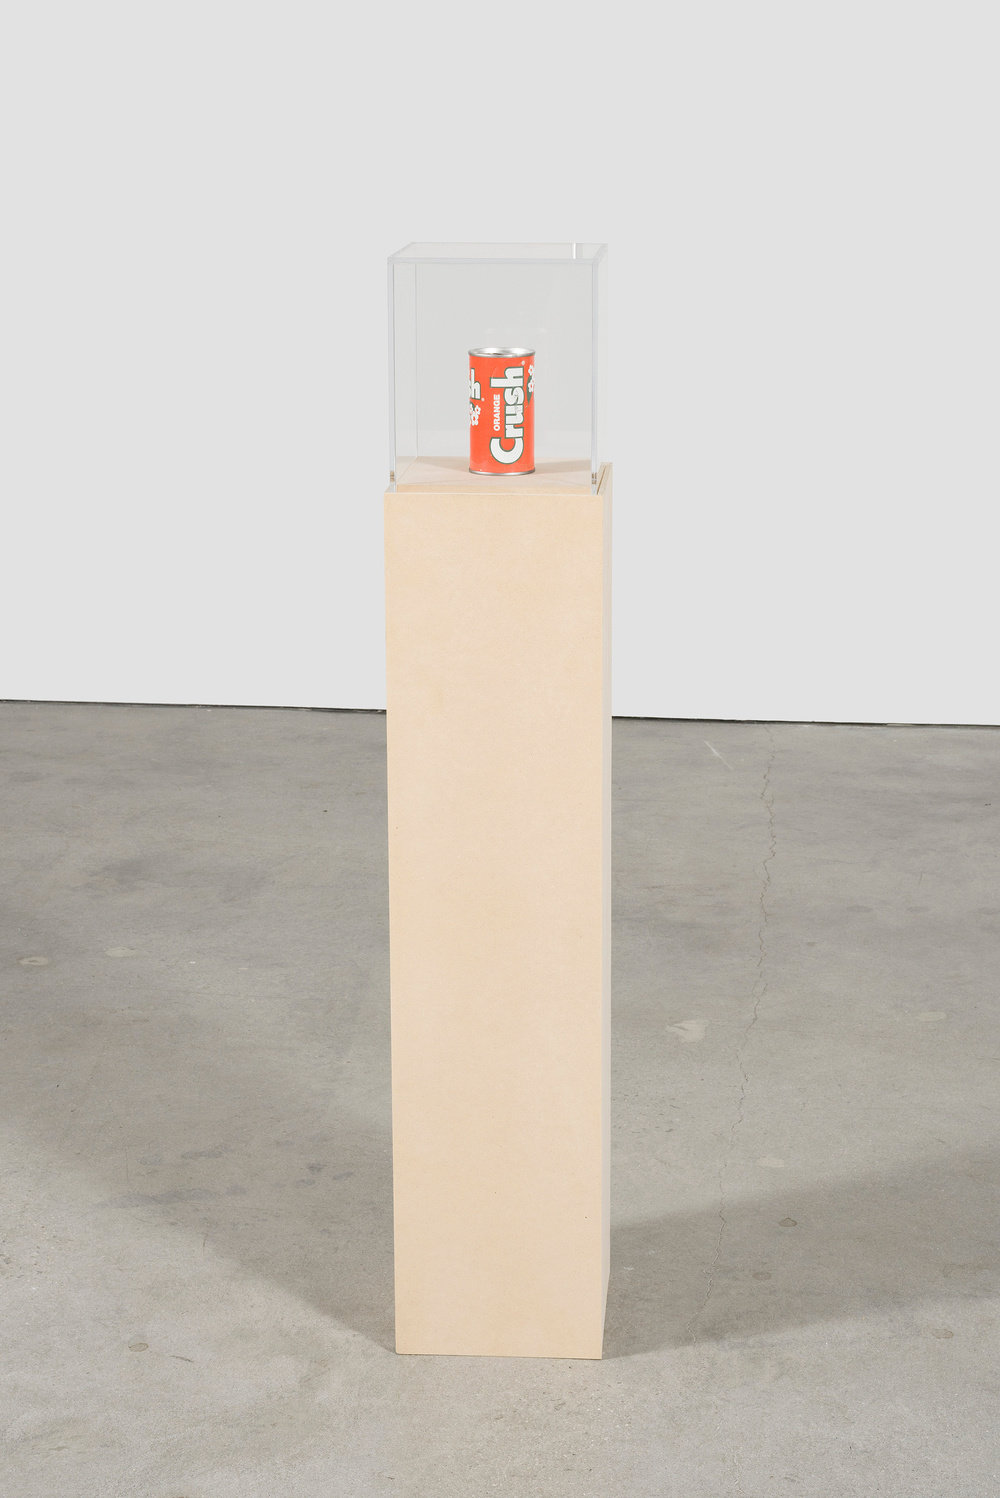 Riepenhoff, chamberlain's crush by chris byrne, 2015, painted aluminum on mdf plexi, 44.75 x 8.5 x 8.5 in. 113.67 x 21.59 x 21.59 cm cnon 57.460